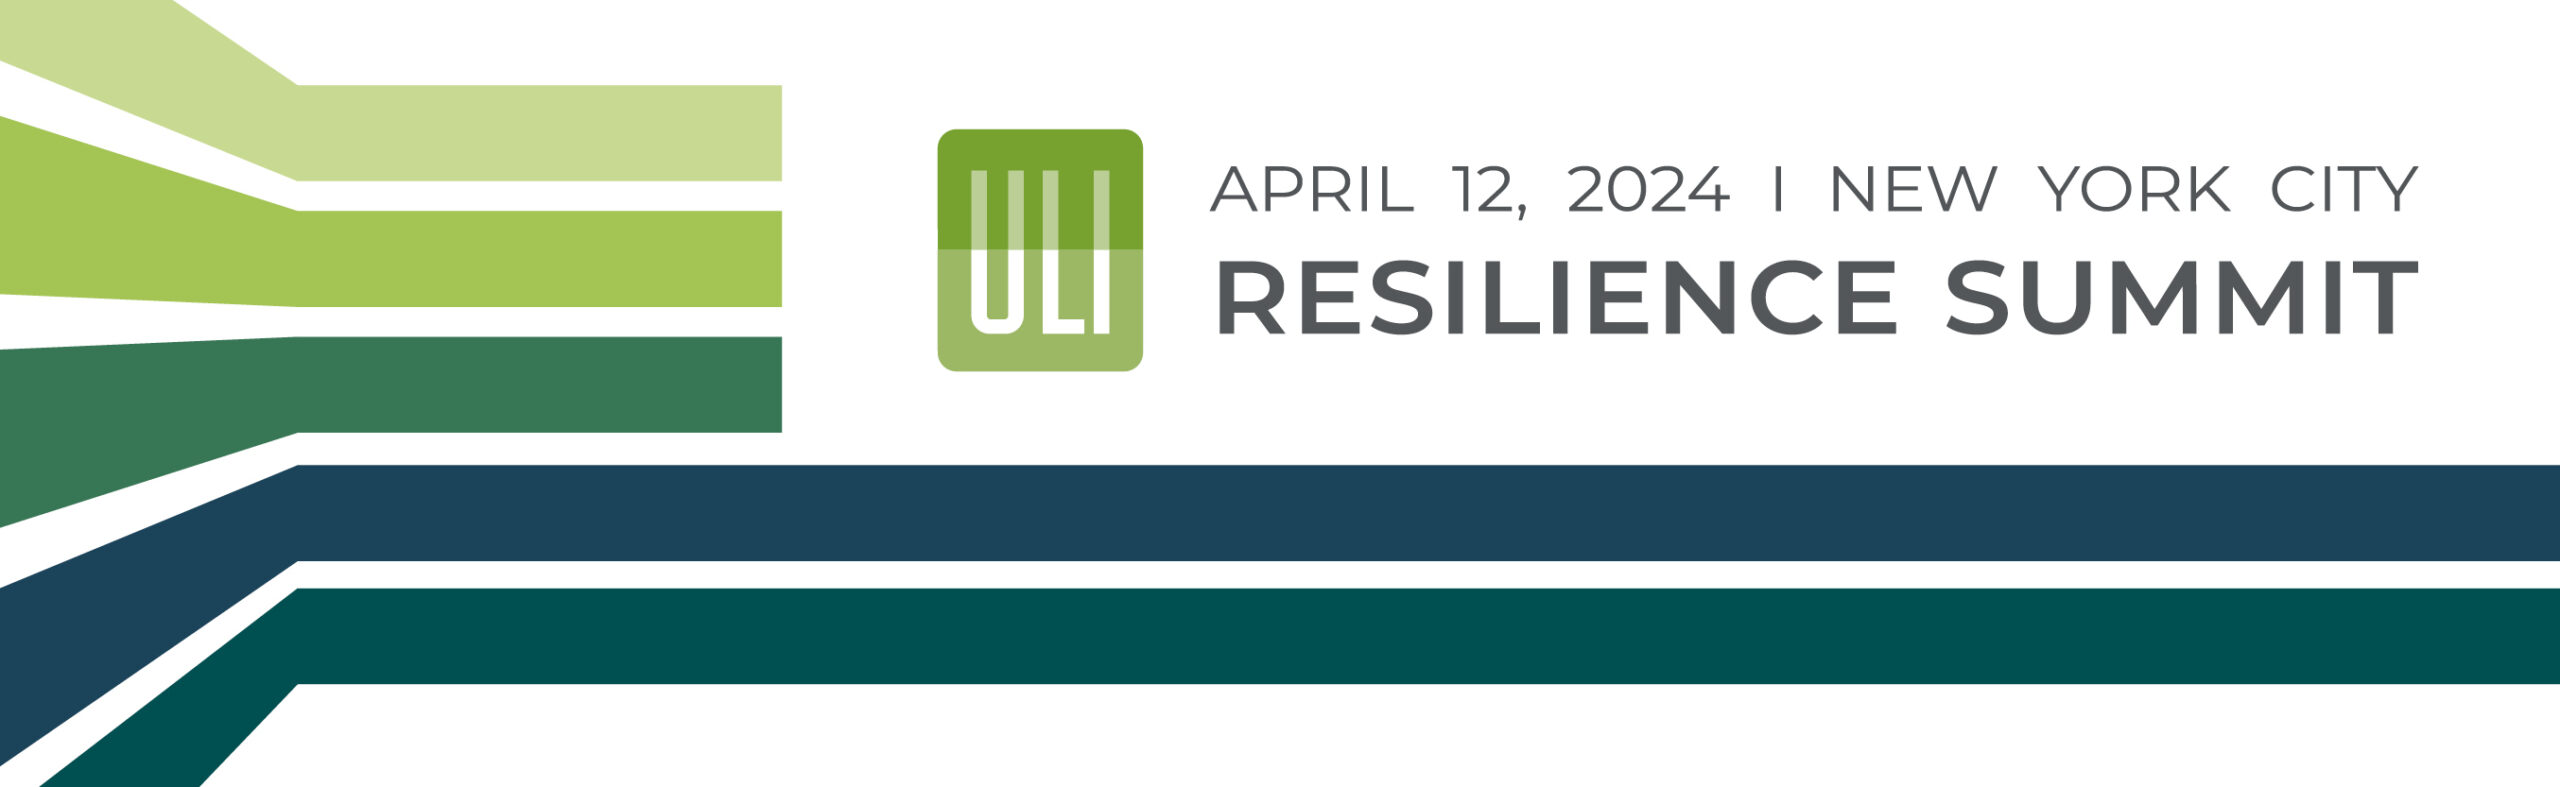 2024 Resilience Summit Banner 